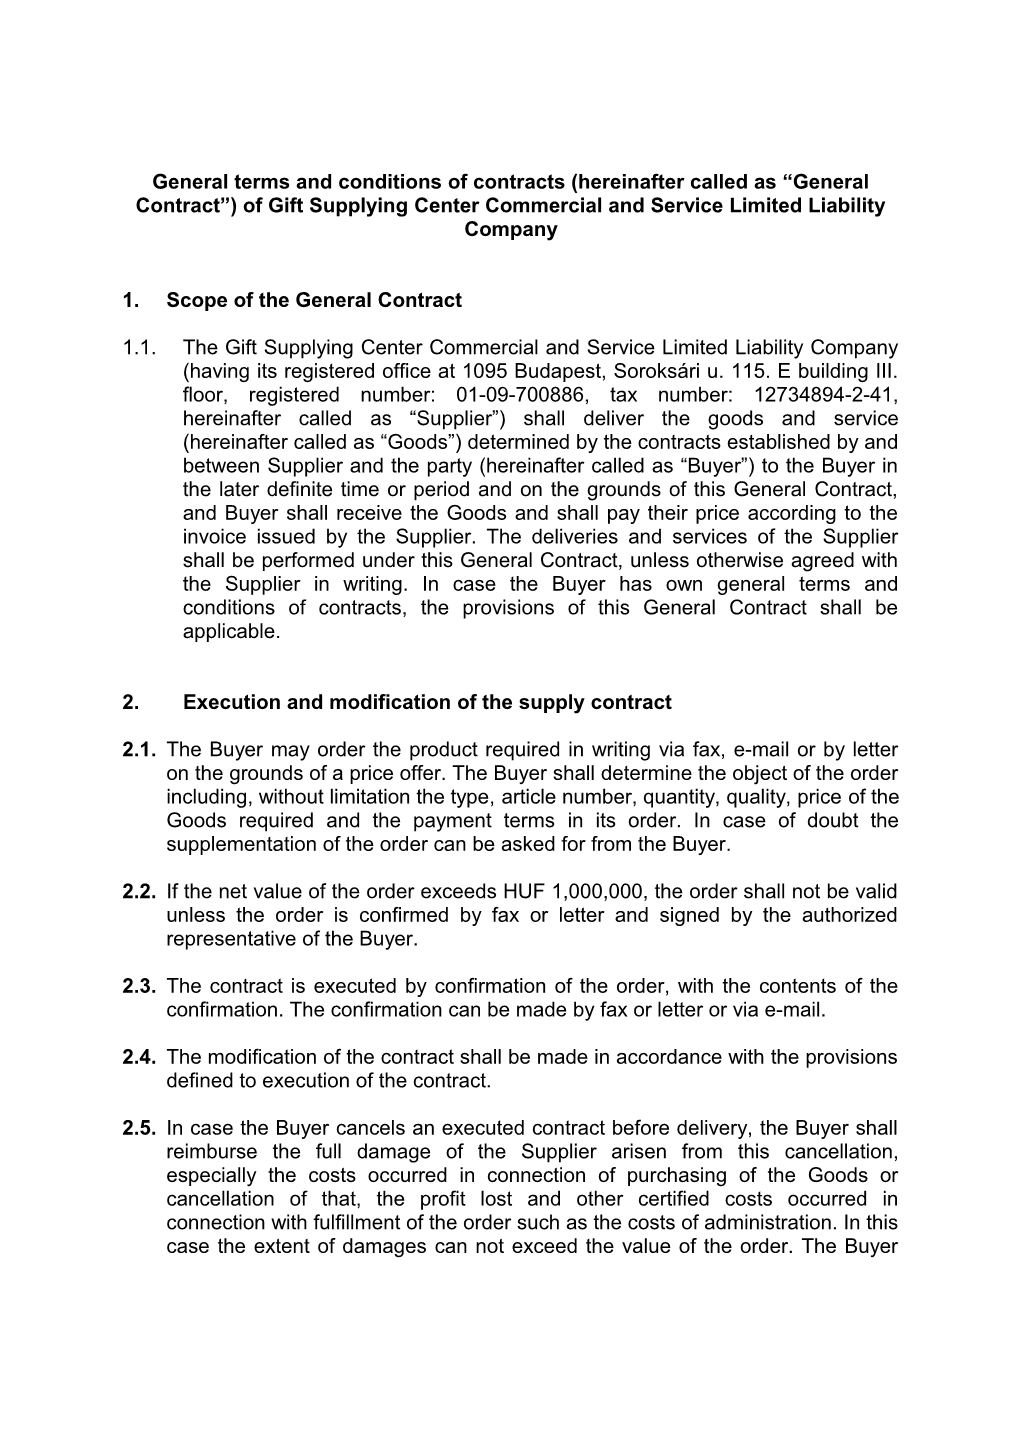 General Terms and Conditions (Hereinafter Called As Contract ) of Gift Supplying Center